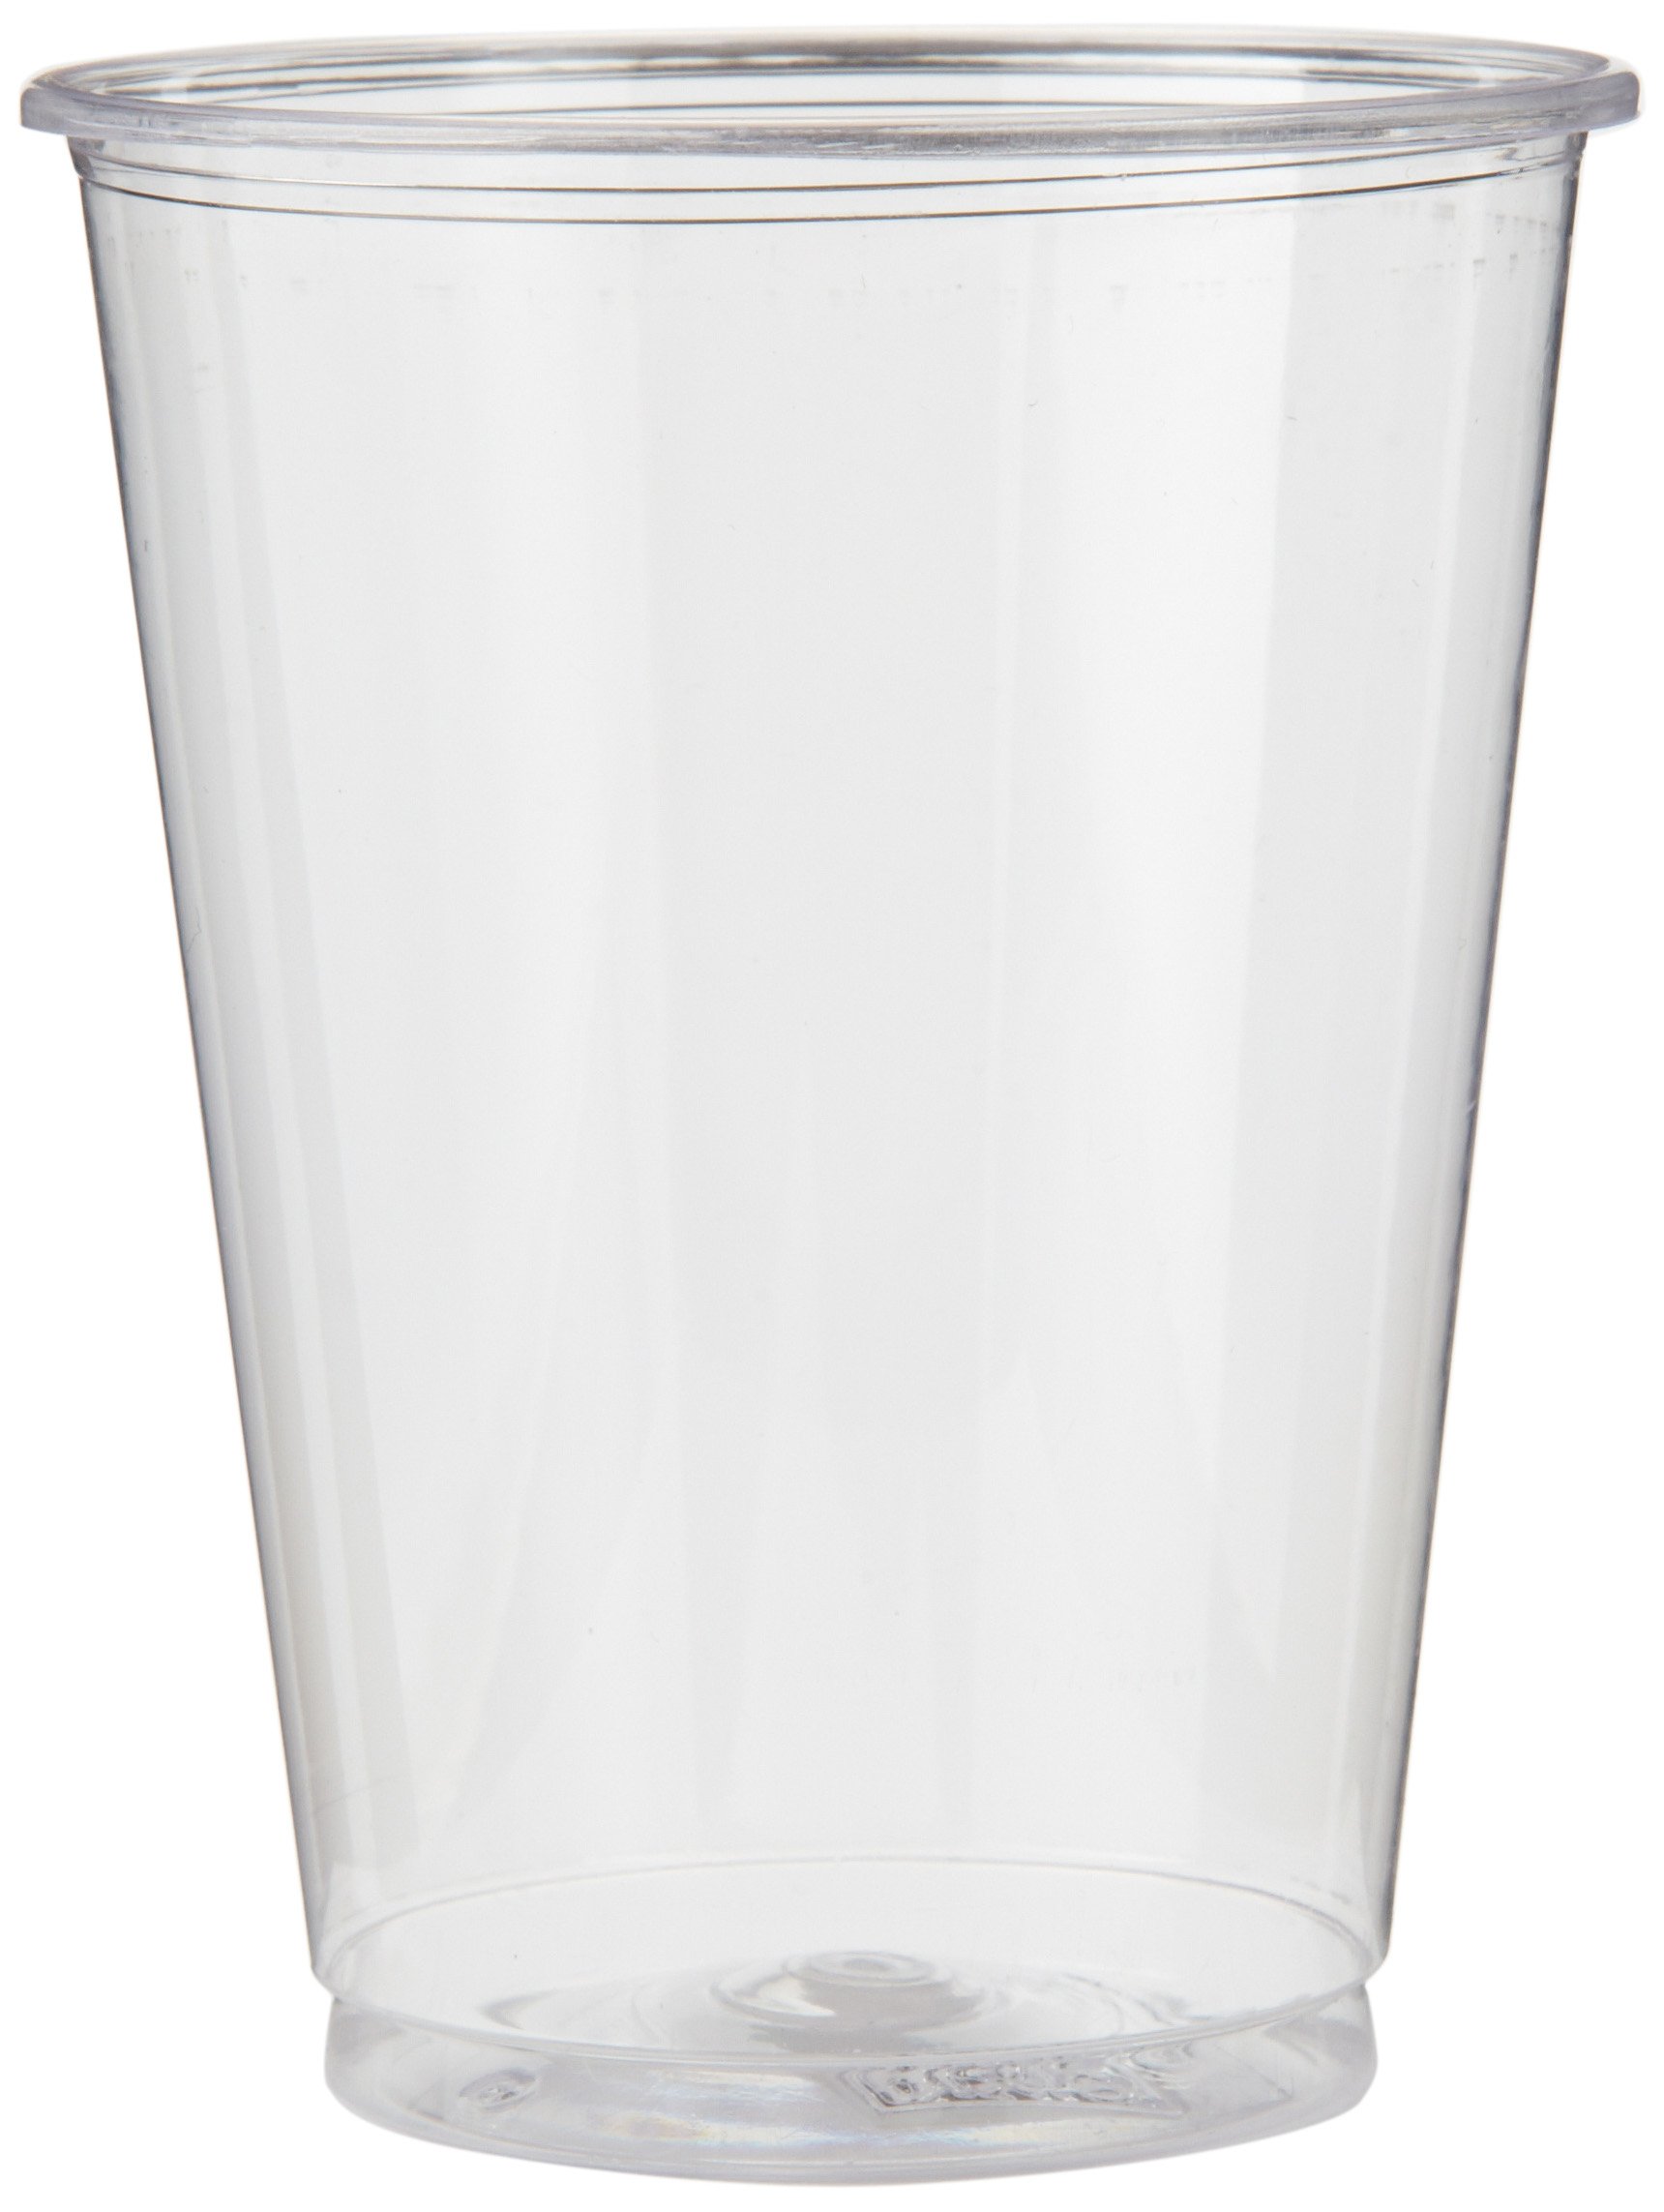 Cups clipart plastic cup. Free cliparts download clip